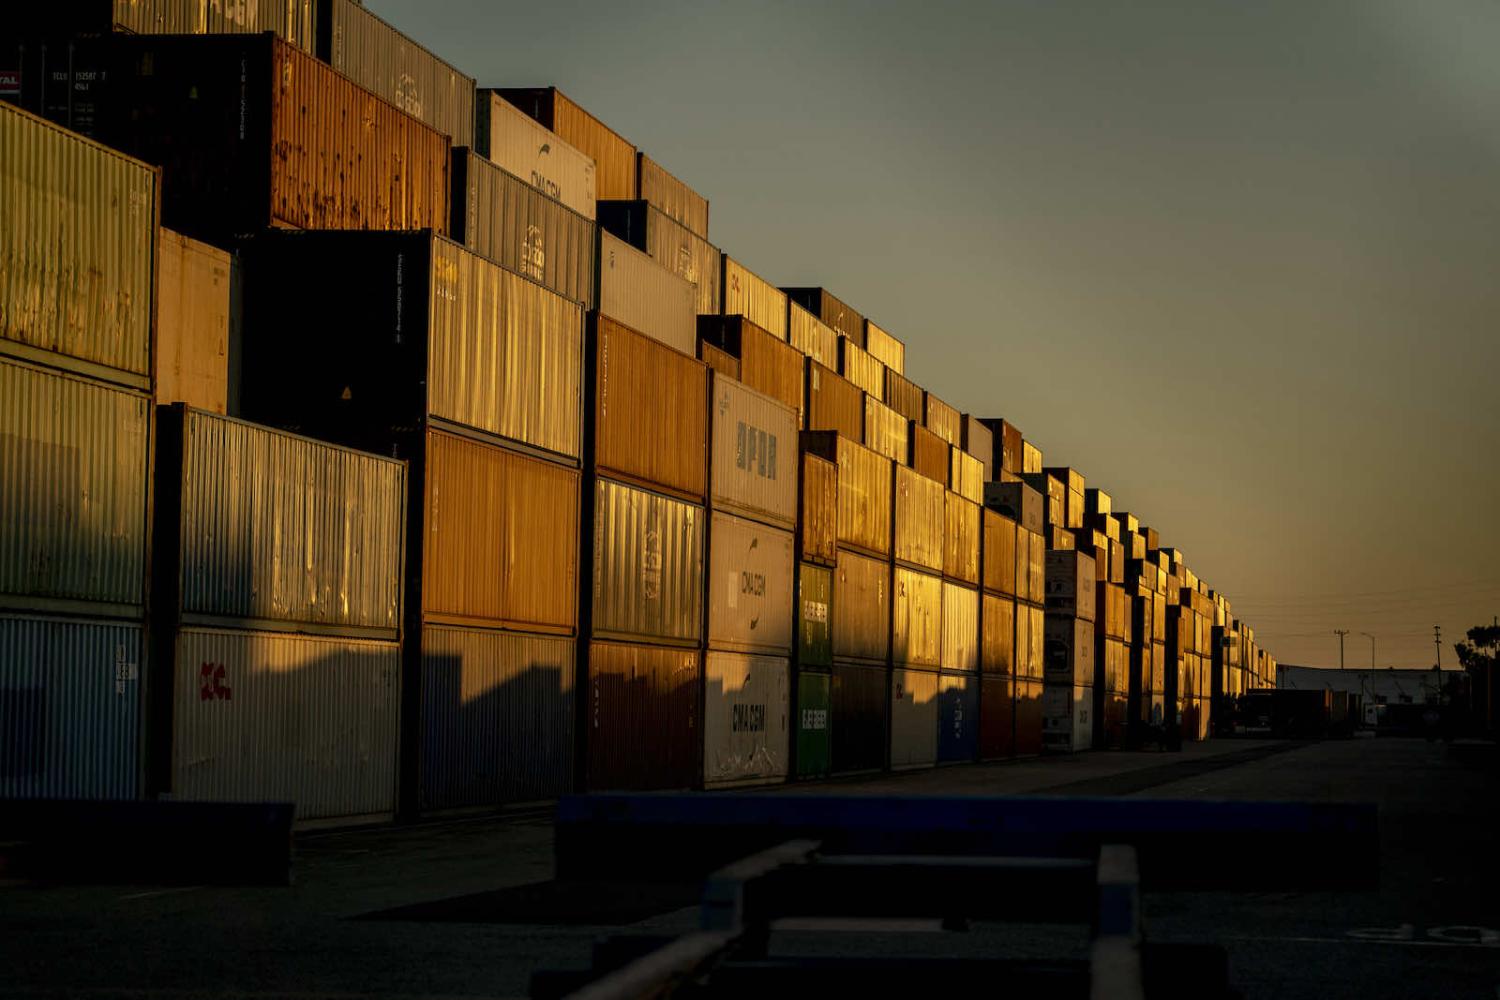 US President Joe Biden has ordered the Port of Los Angeles begin operating 24 hours a day and seven days a week in an effort to move goods and clear a backlog (Kyle Grillot/Bloomberg via Getty Images)